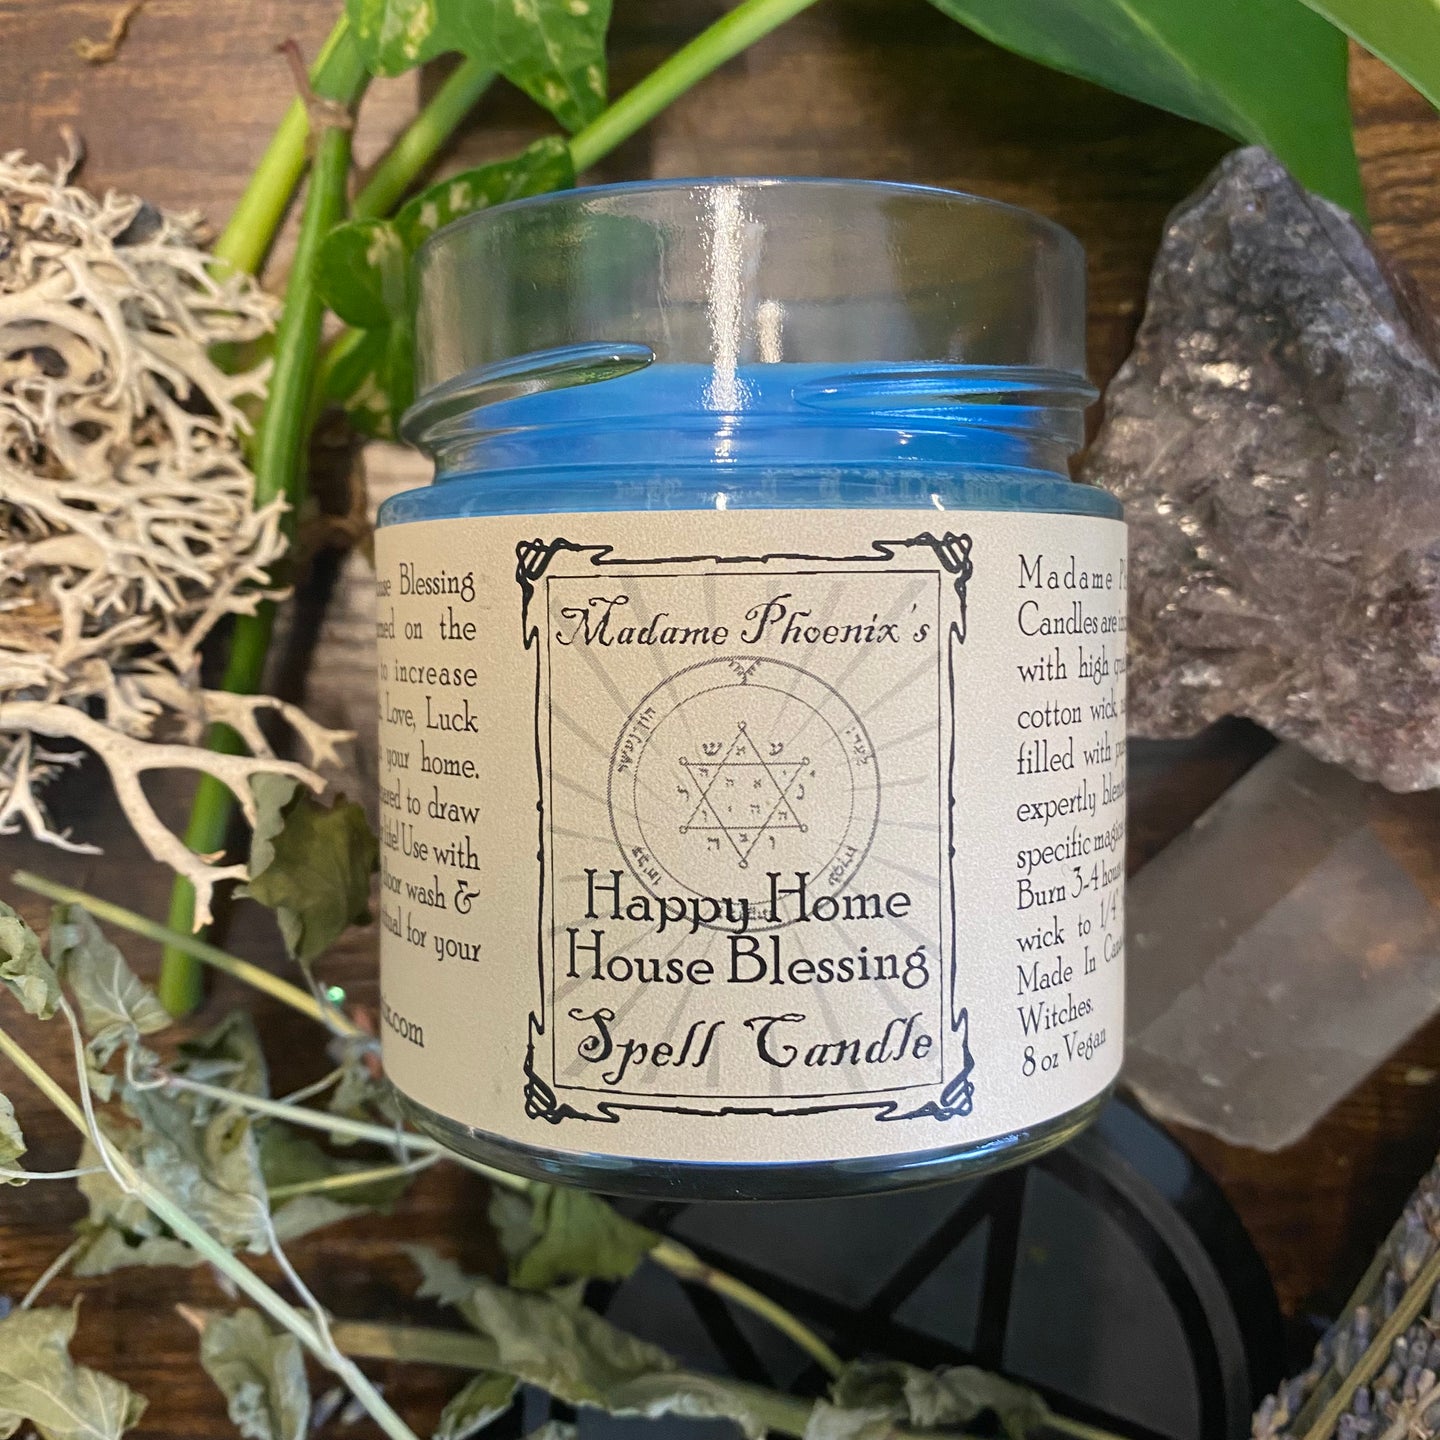 Happy Home Magic House Blessing Spell Candle